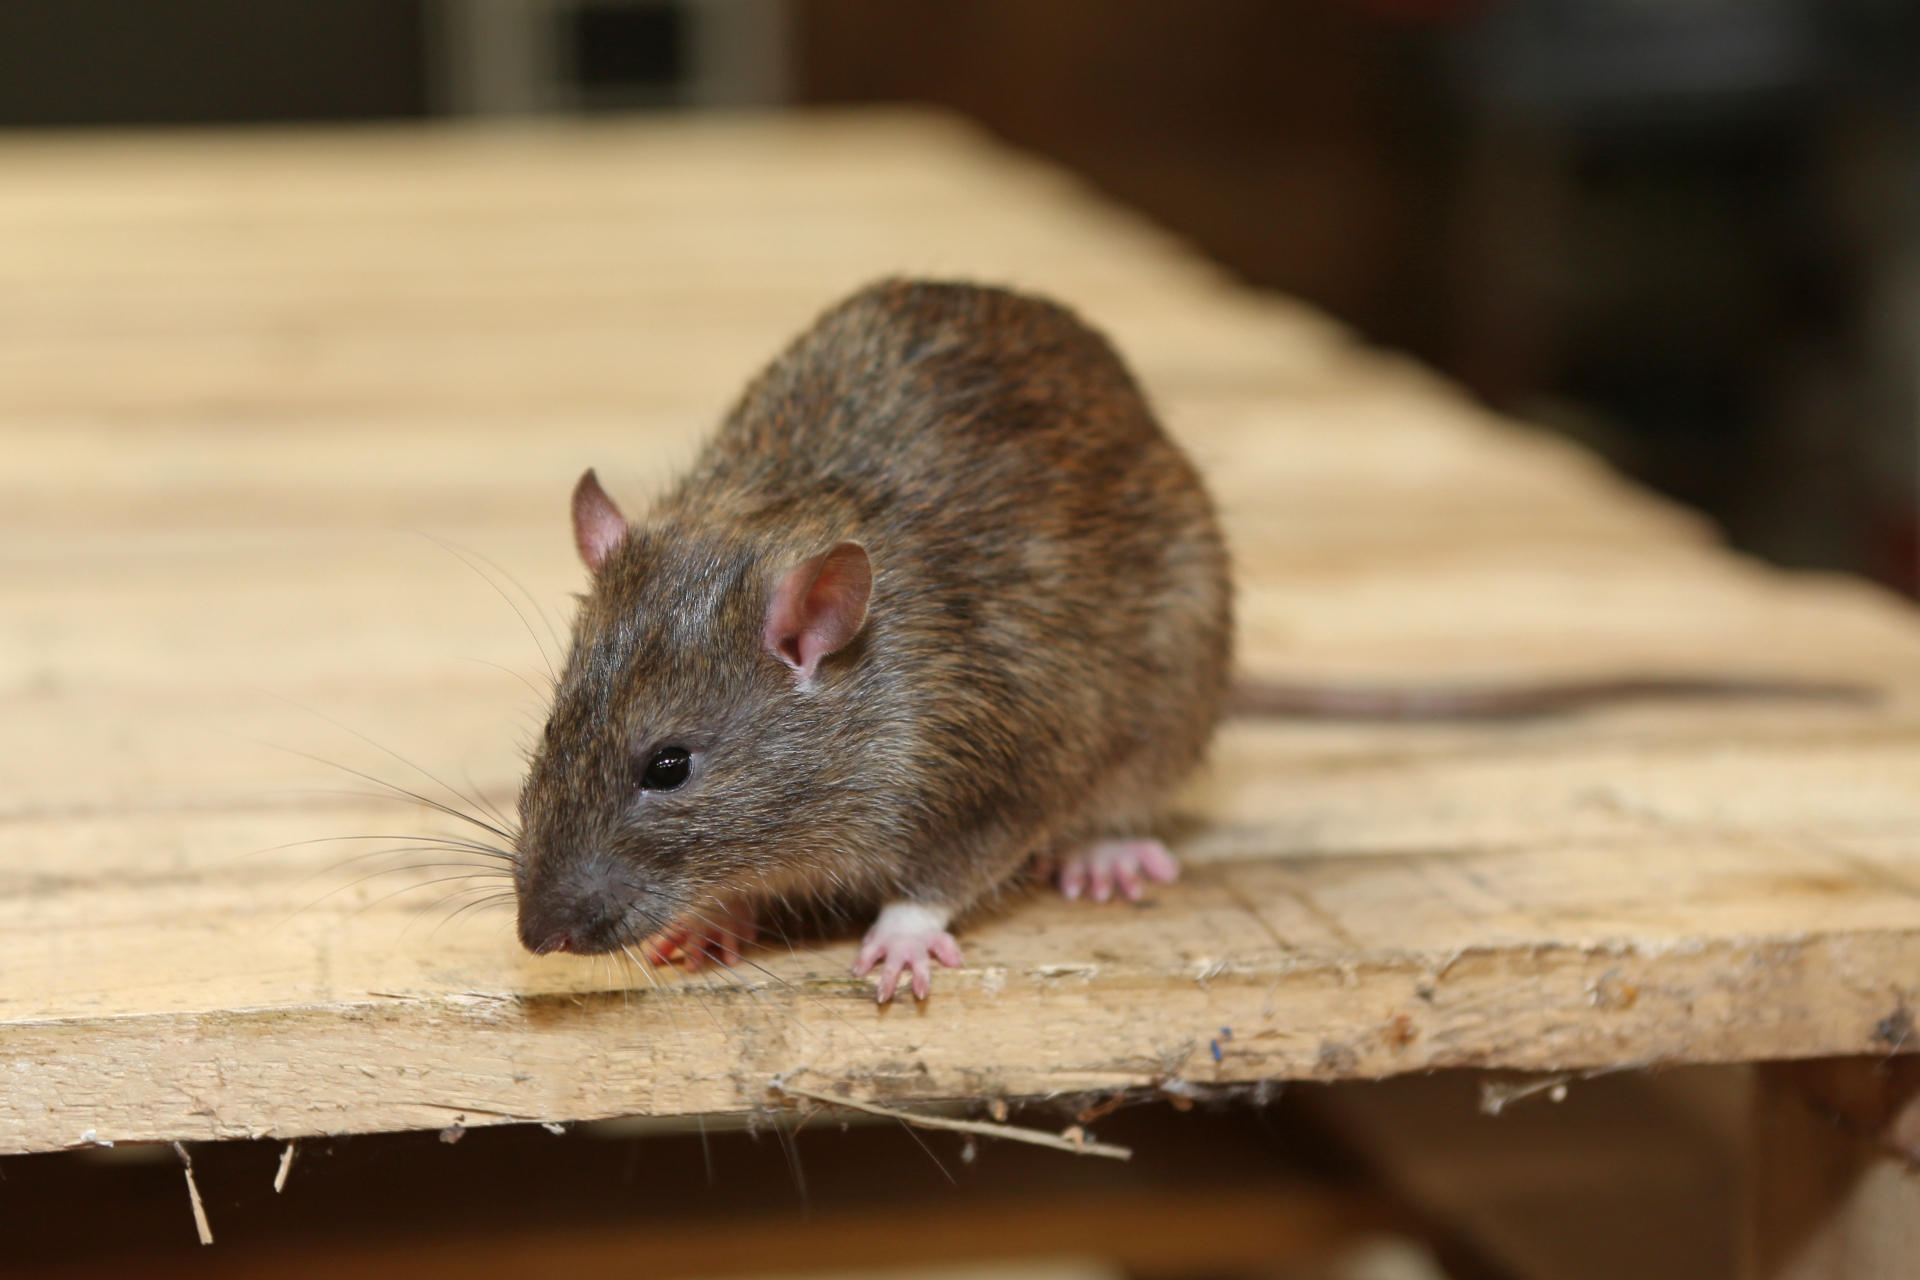 Rat extermination, Pest Control in Charlton, SE7. Call Now 020 8166 9746